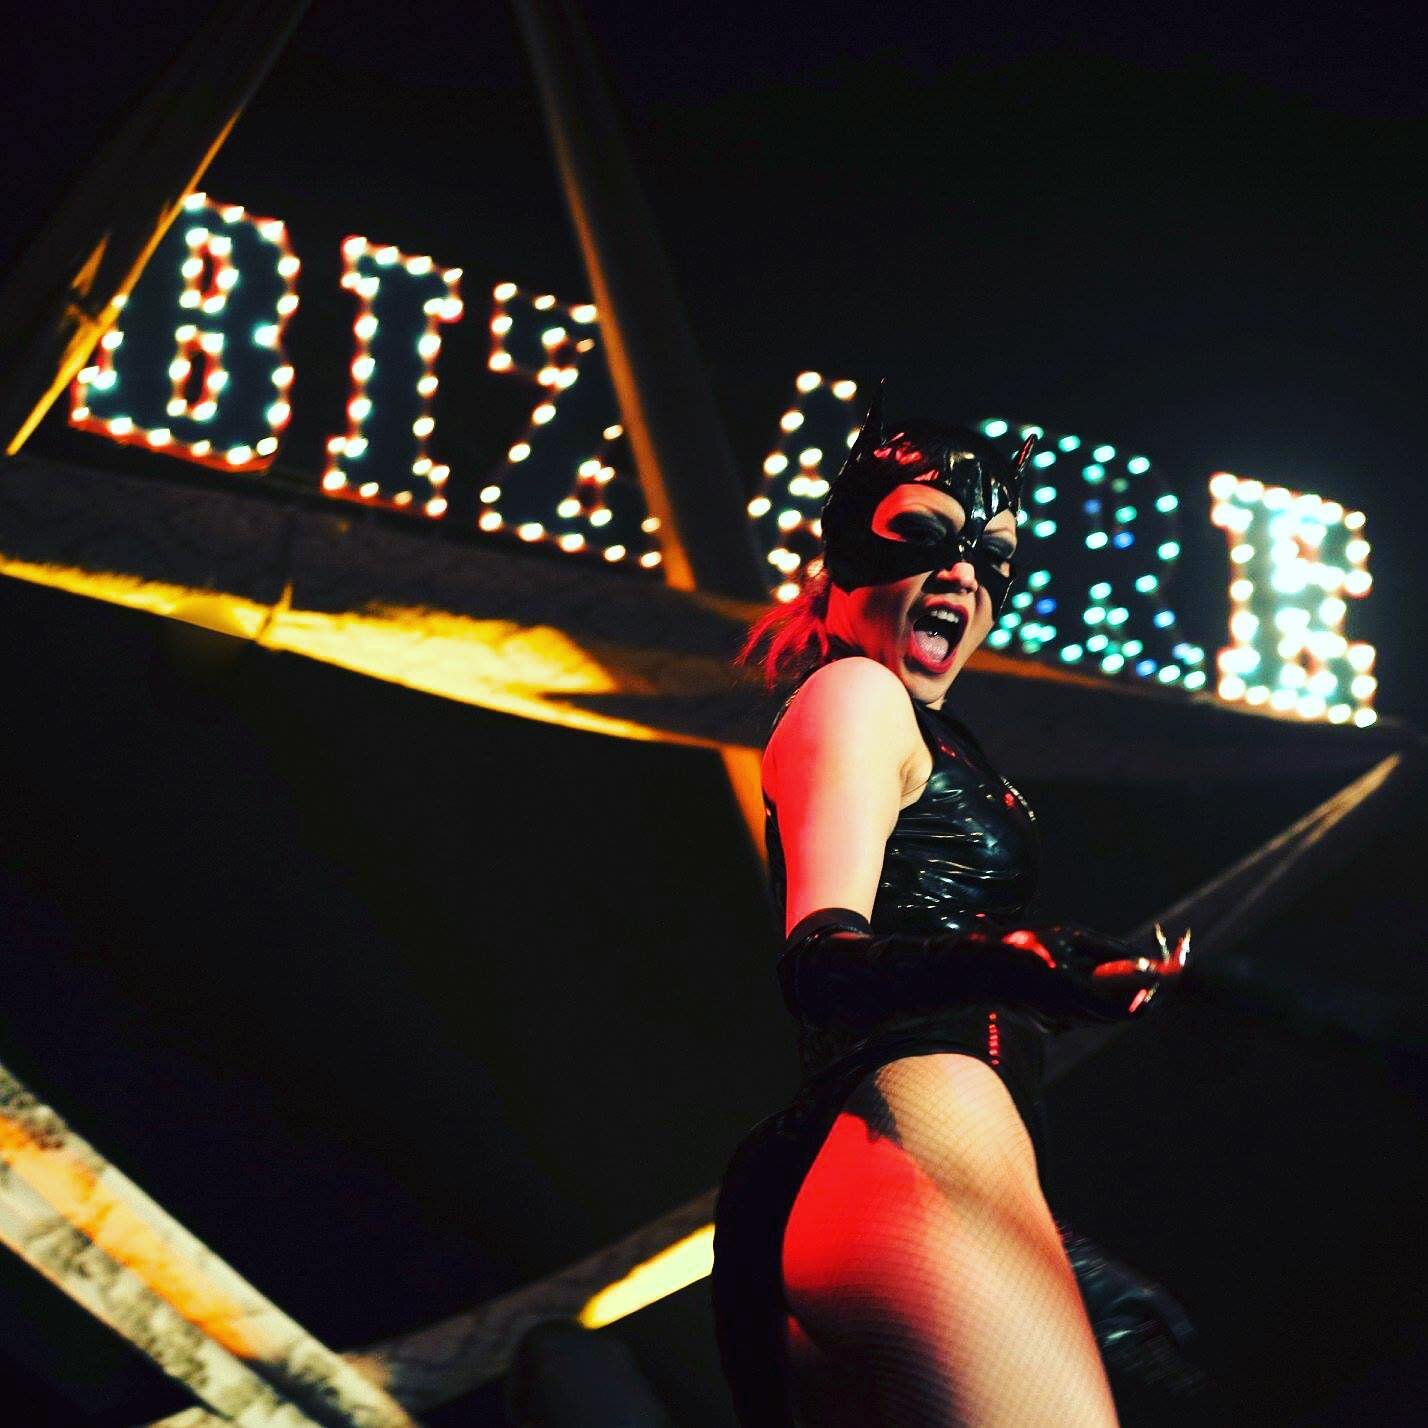 #cabaretbizarre is not a show, it&lsquo;s a life style! @lola on our stage in 2018.📷@ottoboehne  #sexy #queer #noirbizarre #queerpride #queer #queerartist #queerlesque #pole #poleartist #photography #beauty #halloween #halloweencostume #darkcircuspa